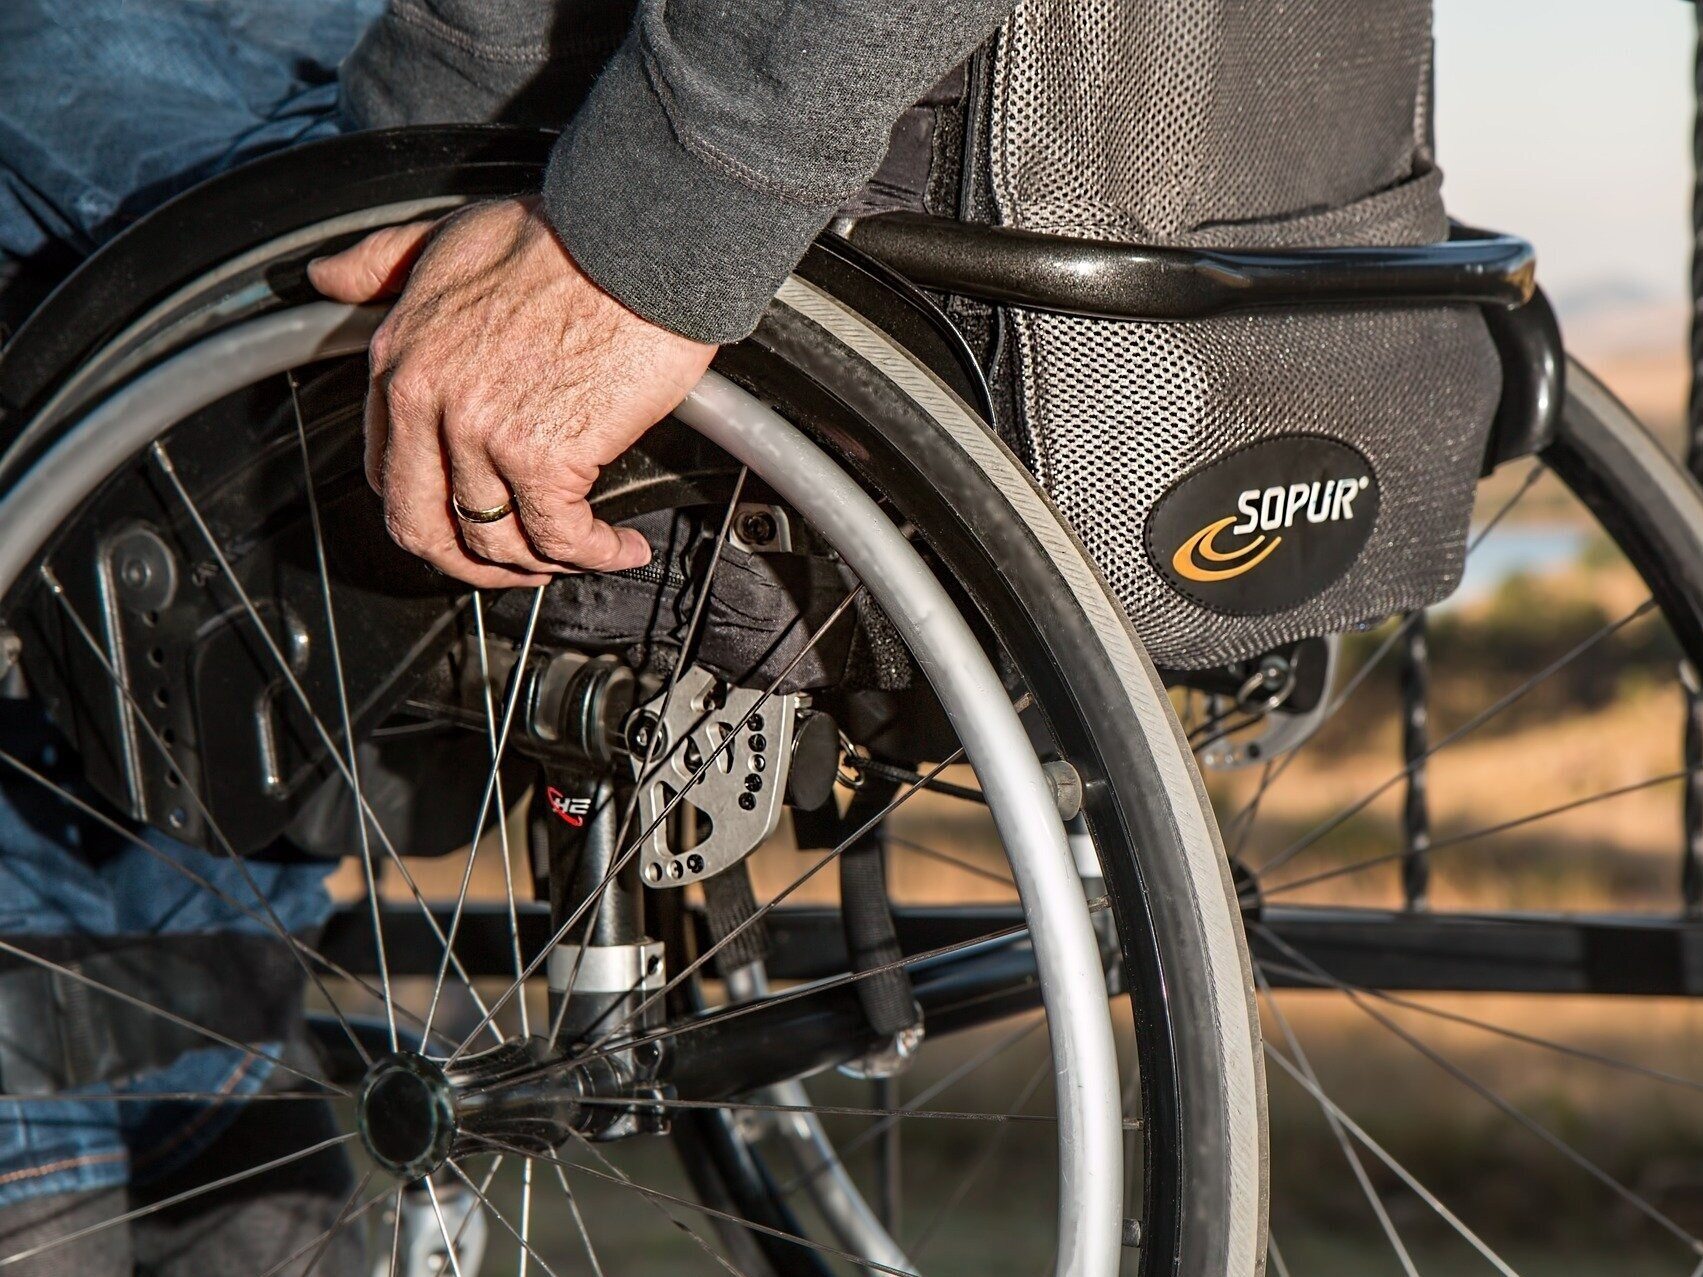 Free equipment rental for the disabled has started.  Applications can now be submitted